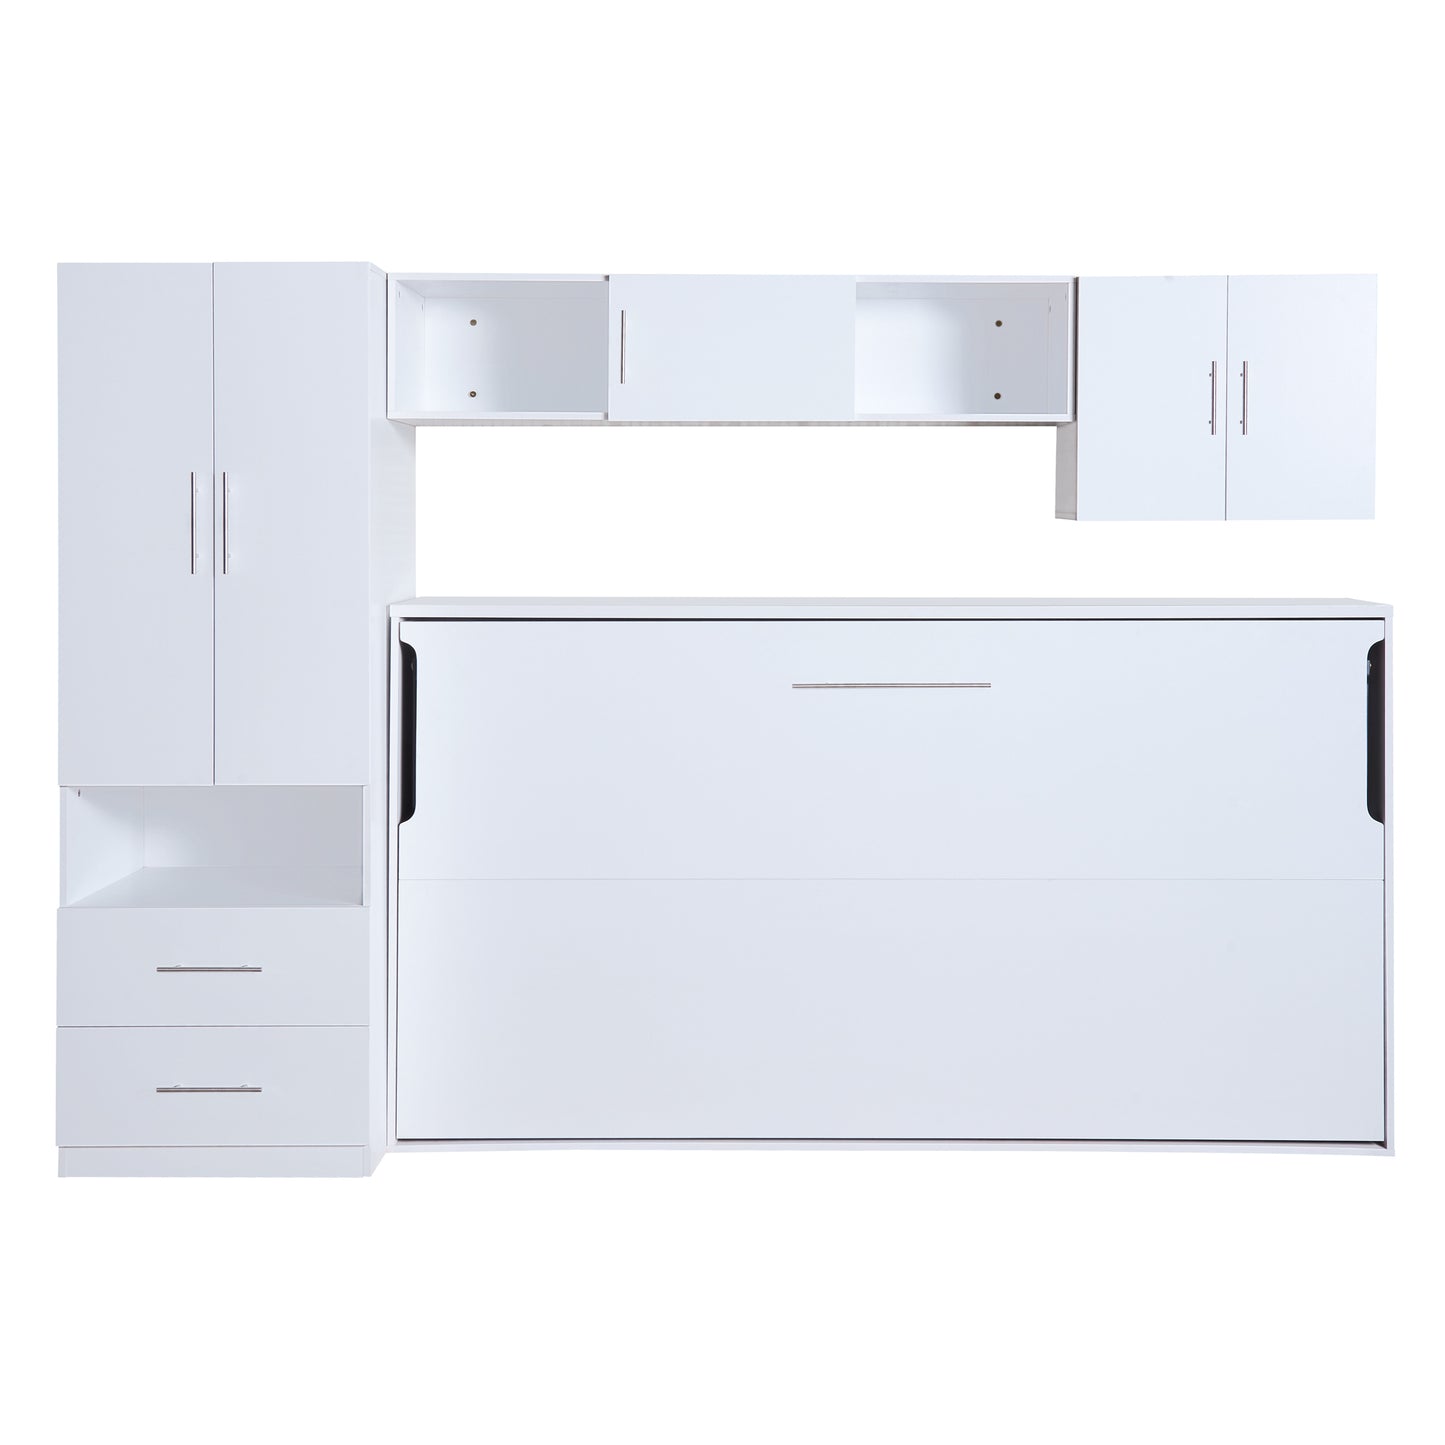 Twin Size Murphy Bed with Open Shelves and Storage Drawers,Built-in Wardrobe and Table, White